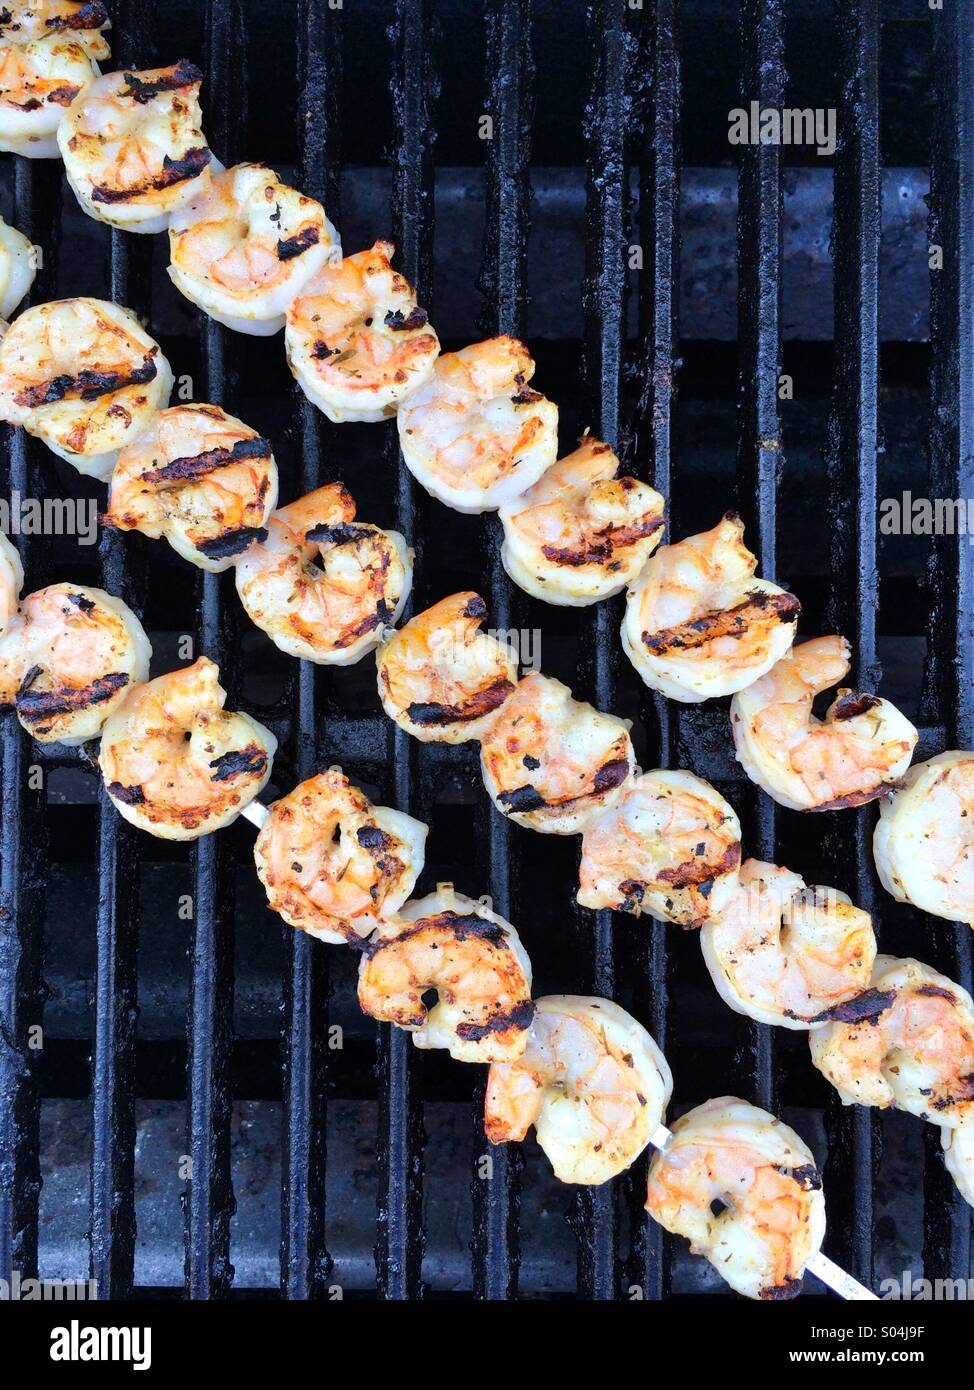 Diagonal rows of grilled shrimp on skewers Stock Photo